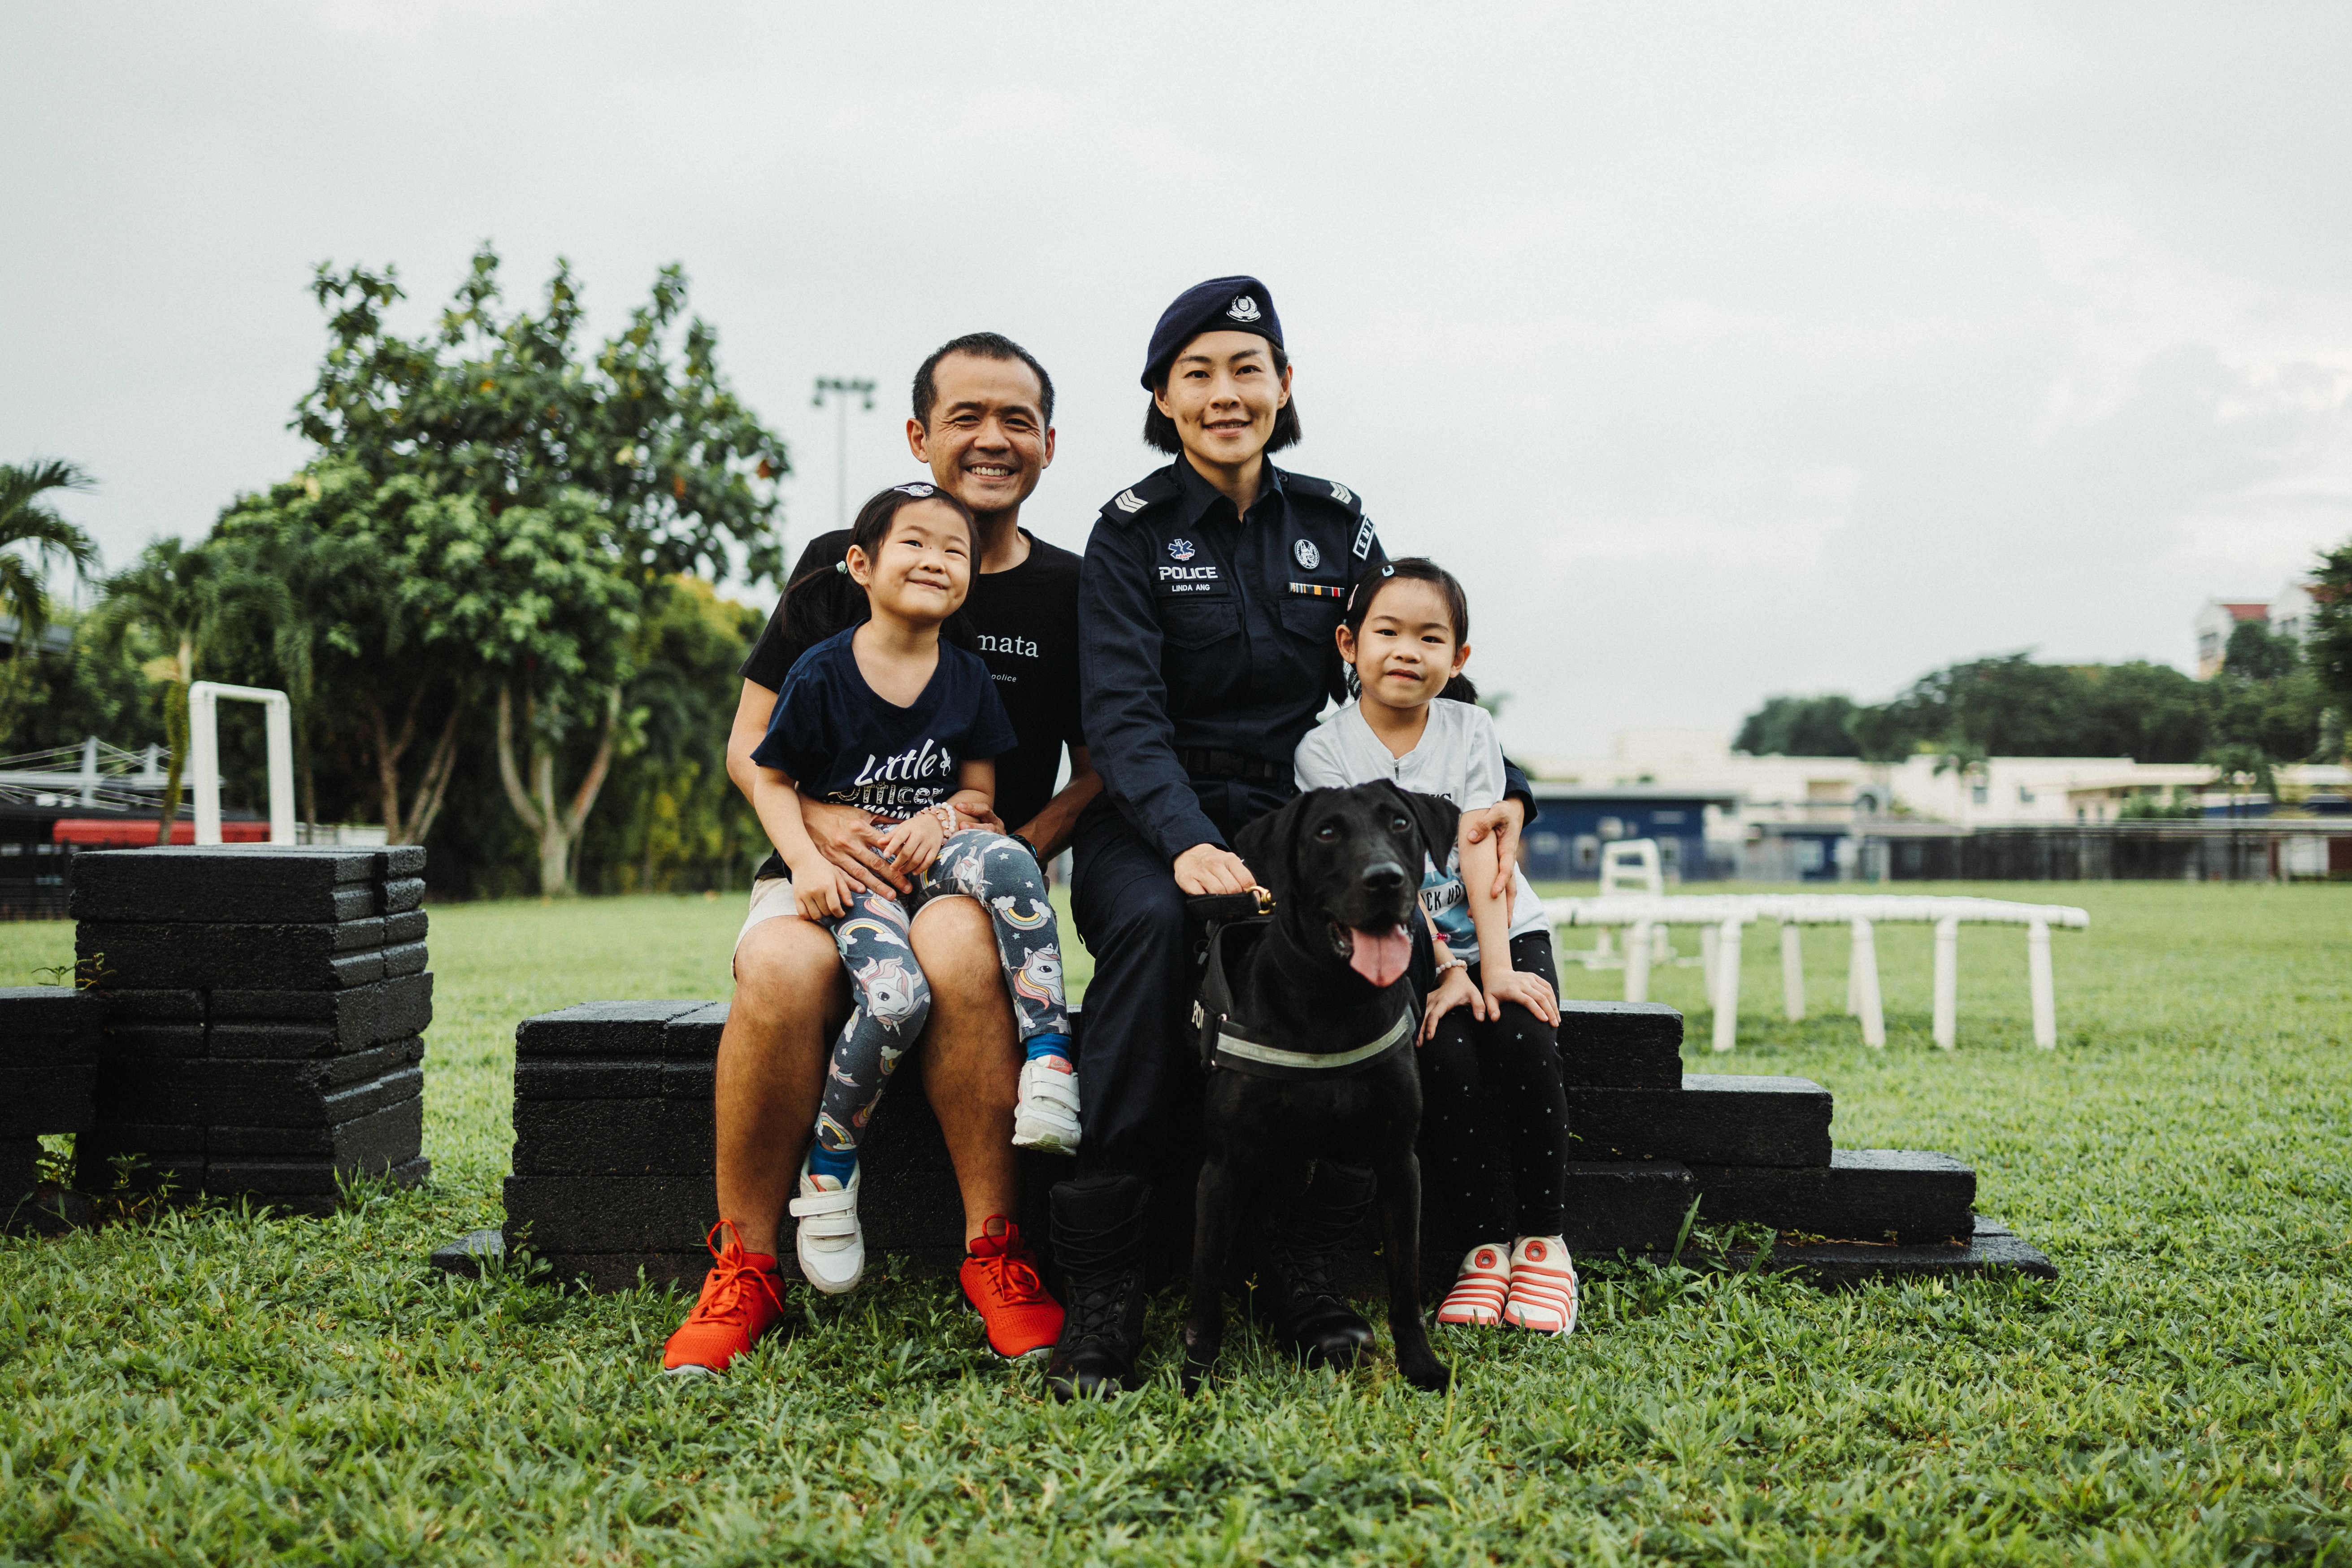 family sitting together on a field of grass, on top of a dog obstacle element